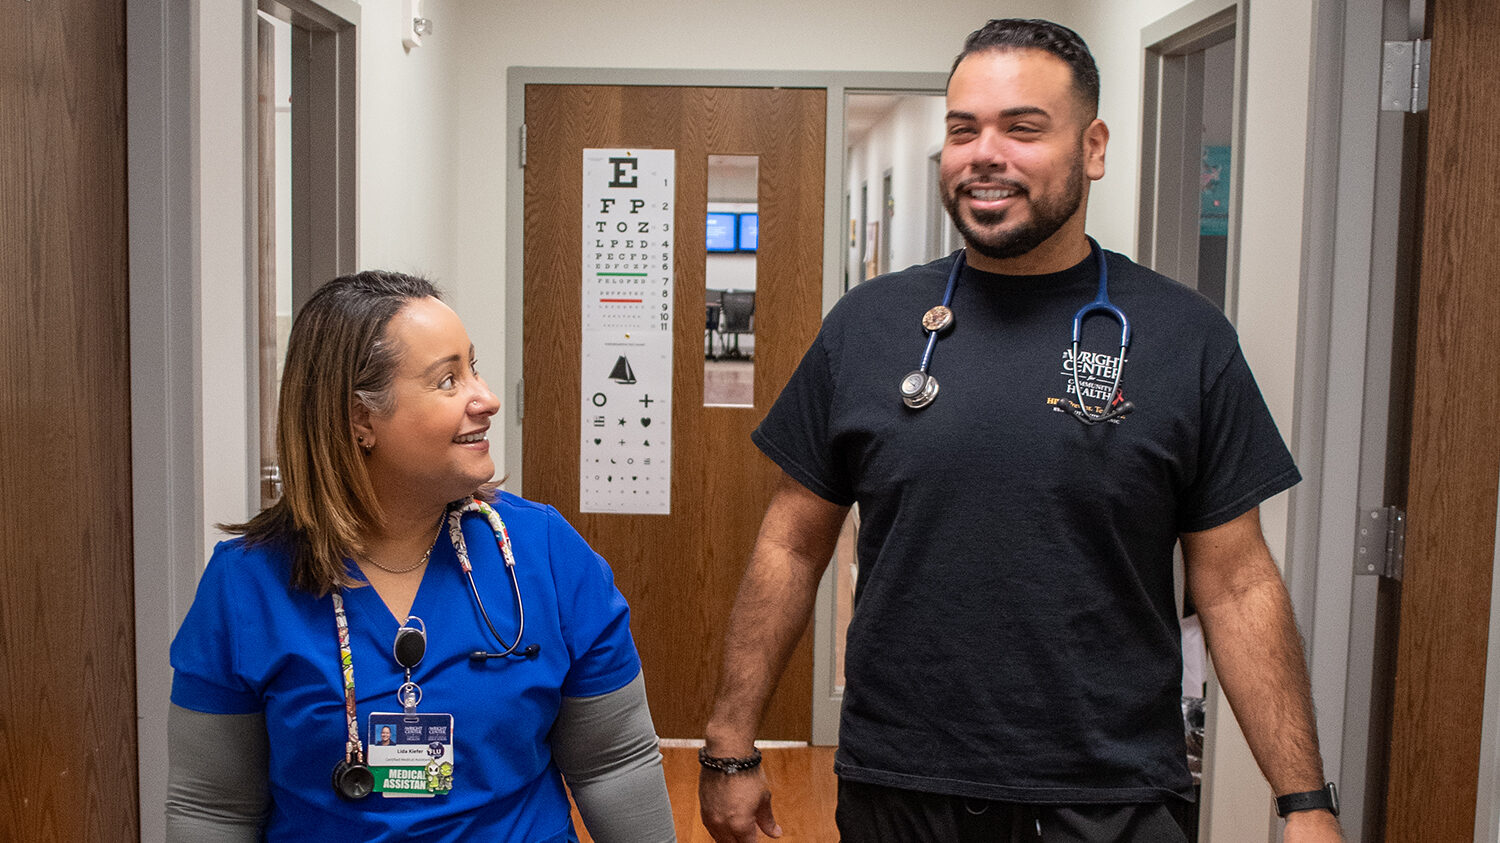 Lida Kiefer, left, and Anthony Beltran, who work at The Wright Center for Community Health,
recently completed a training program to serve as medical interpreters. Each assists Spanish-
speaking patients, helping to ensure they get the same access to primary and preventive care
services as English speakers.
